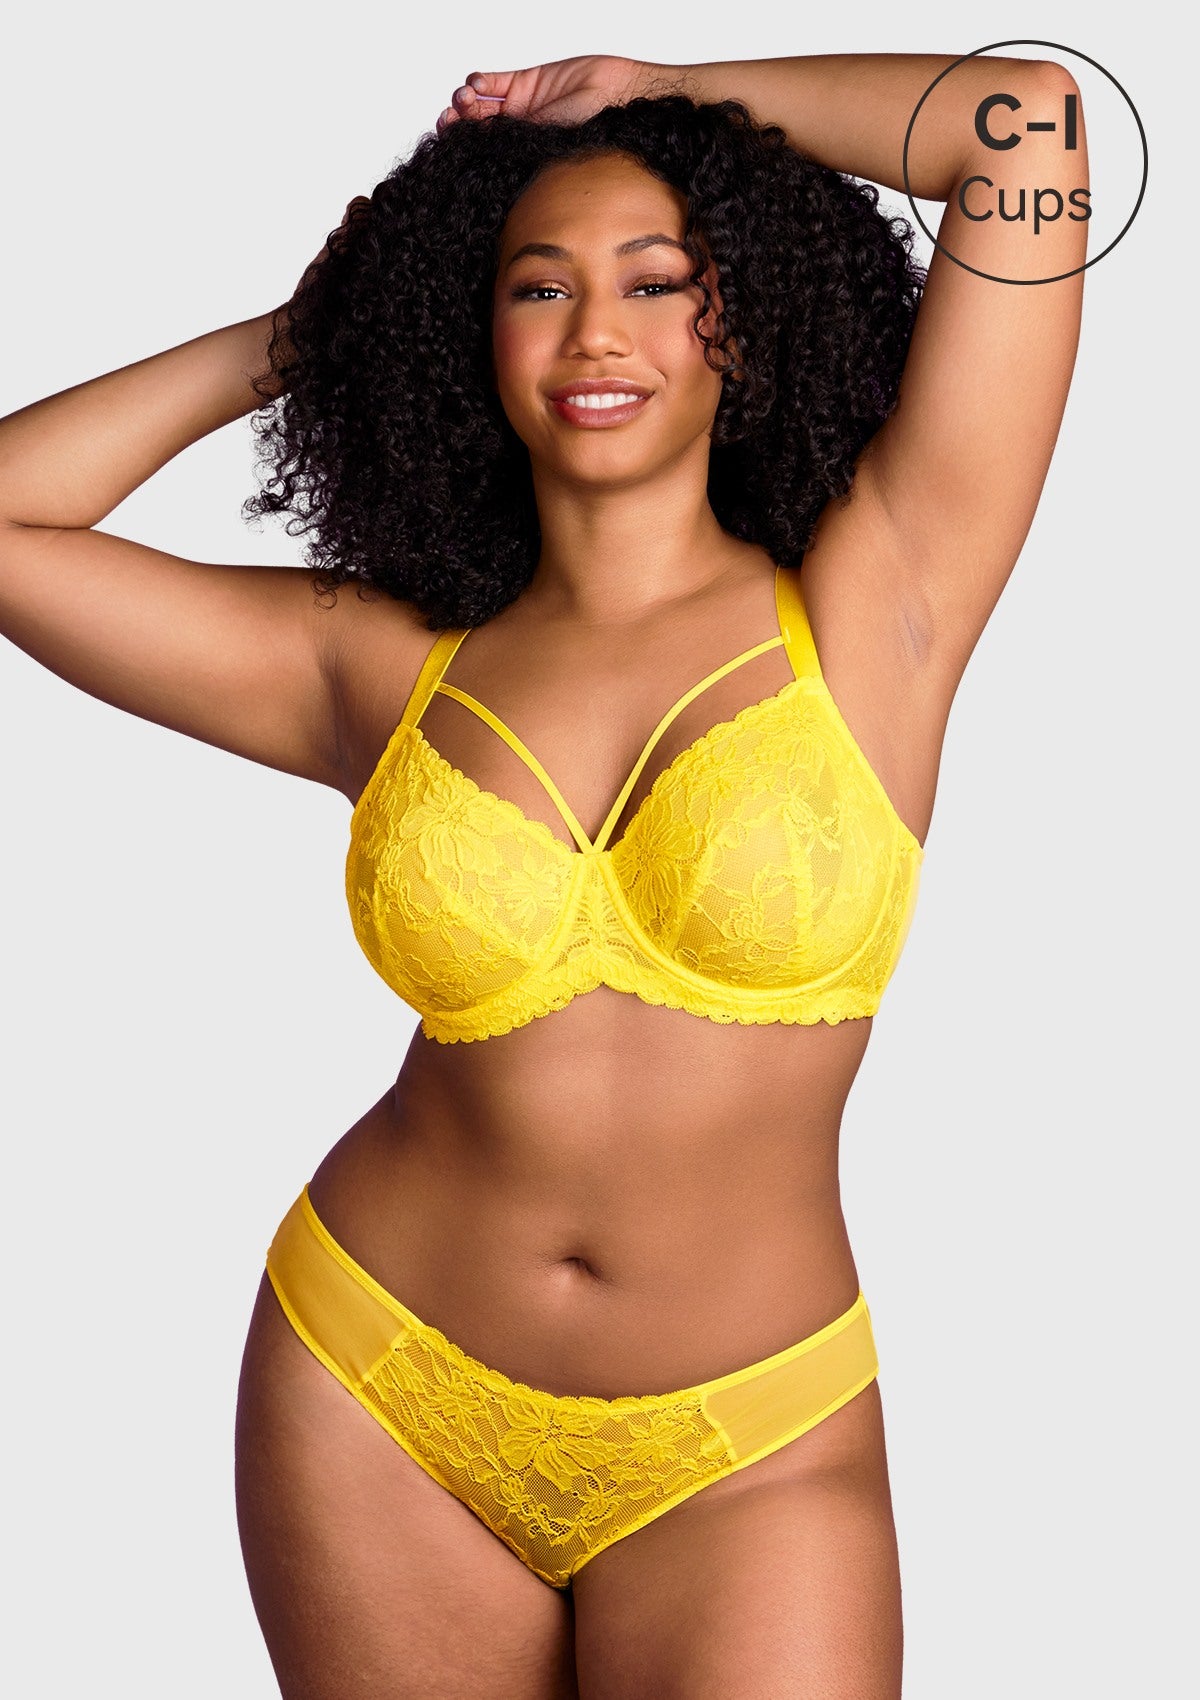 HSIA Unlined Lace Mesh Minimizer Bra For Large Breasts, Full Coverage - Bright Yellow / 40 / DD/E